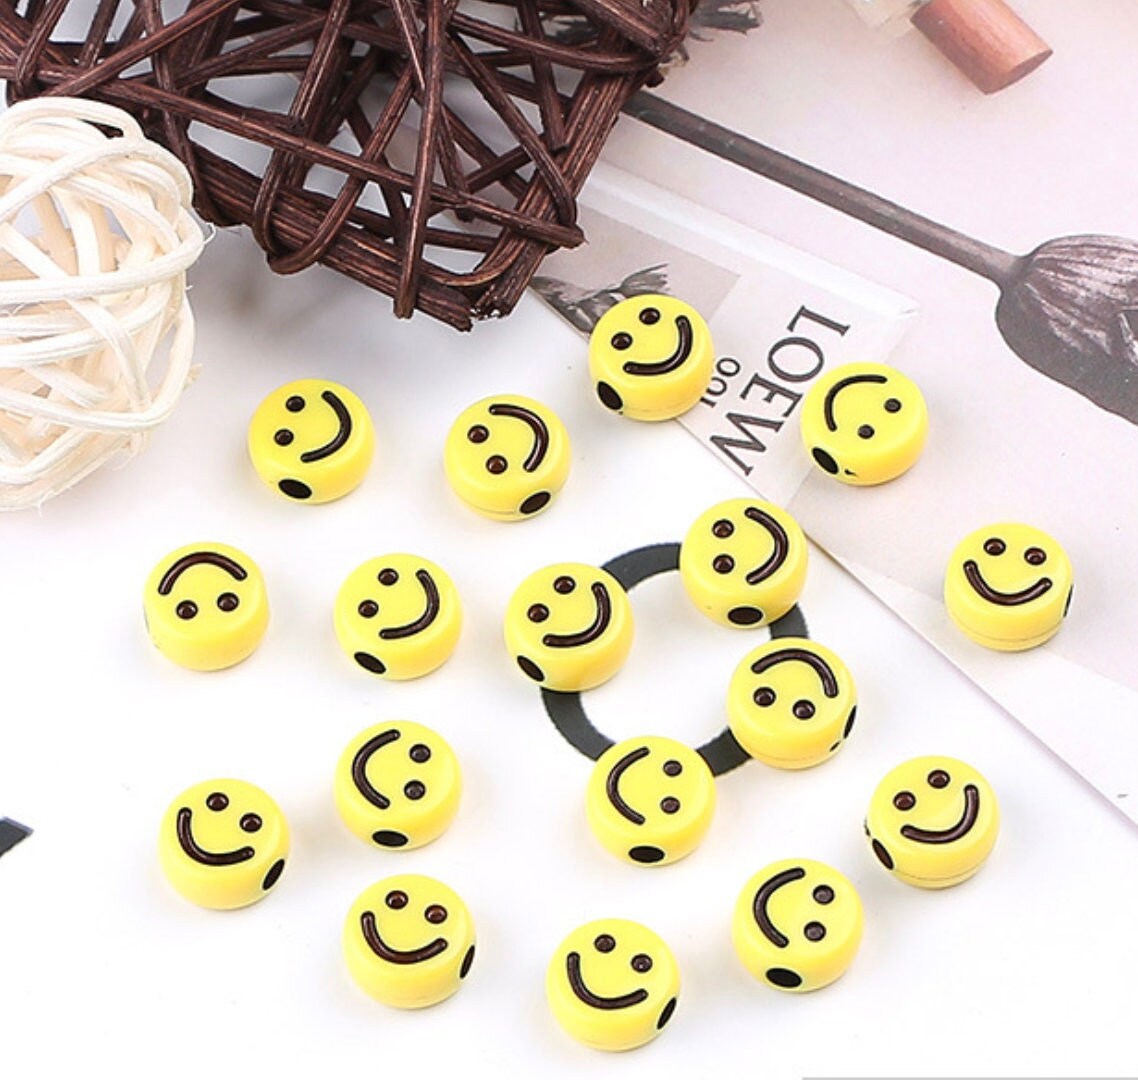  Smiley Face Beads for Jewelry Making - 200 Pieces 7mm Smile  Face Beads